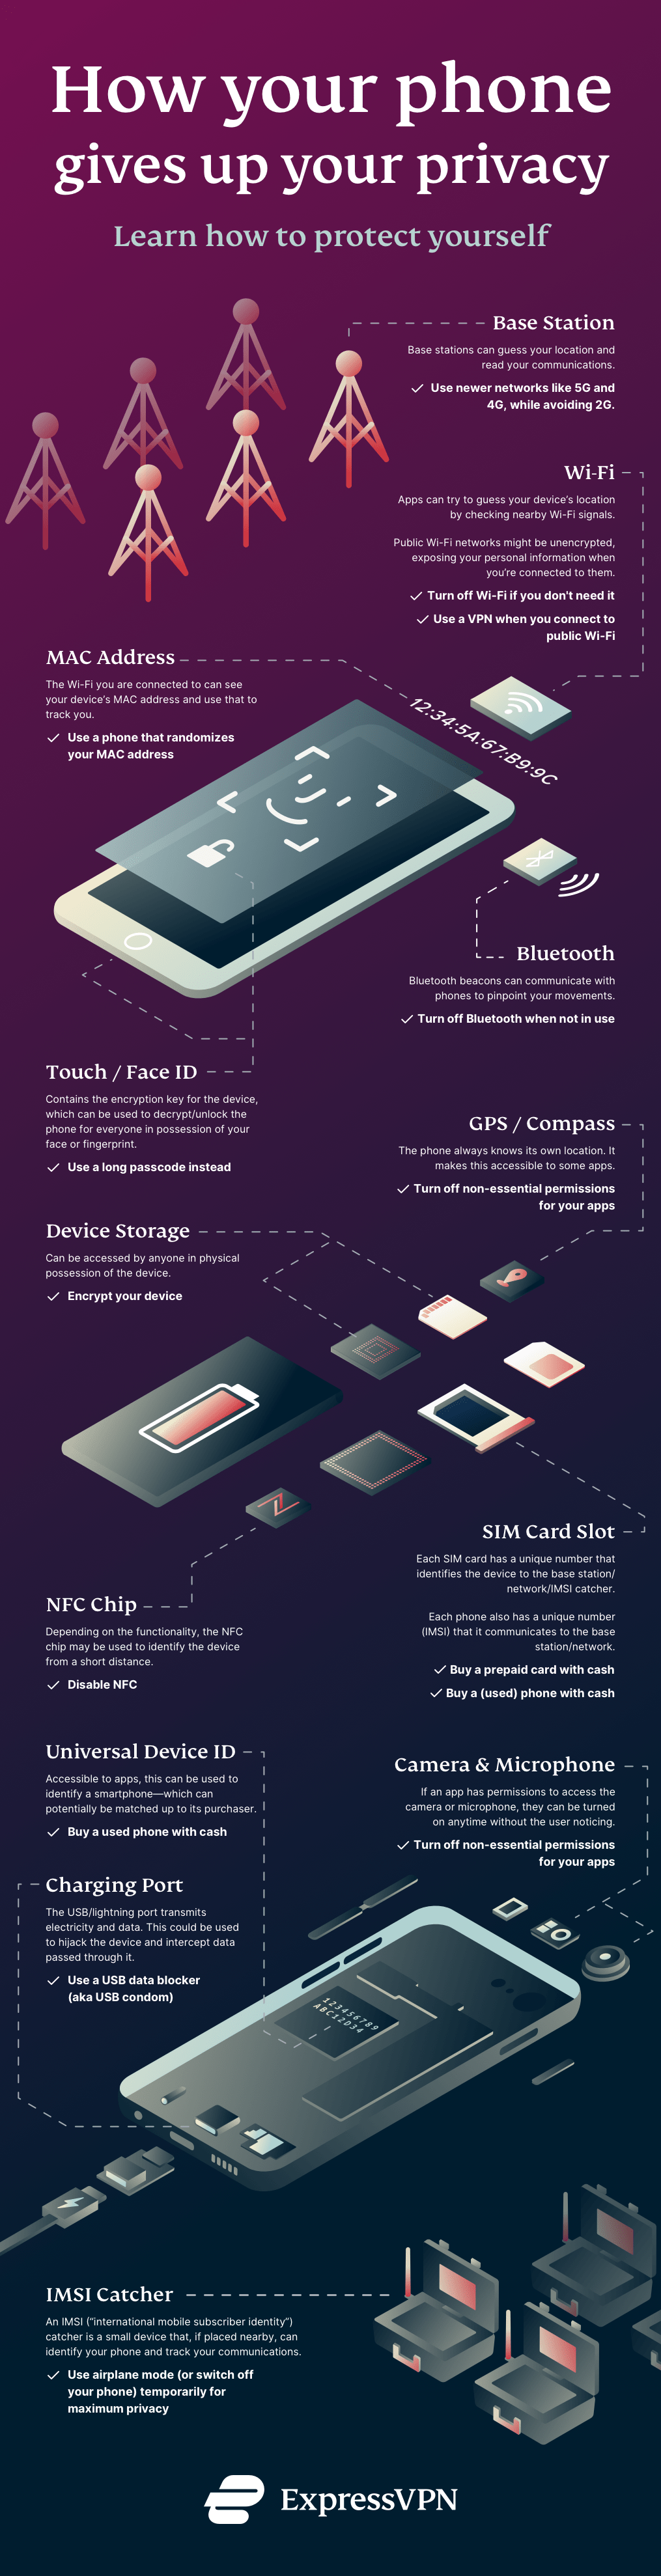 Infographic on how your phone gives up your privacy.